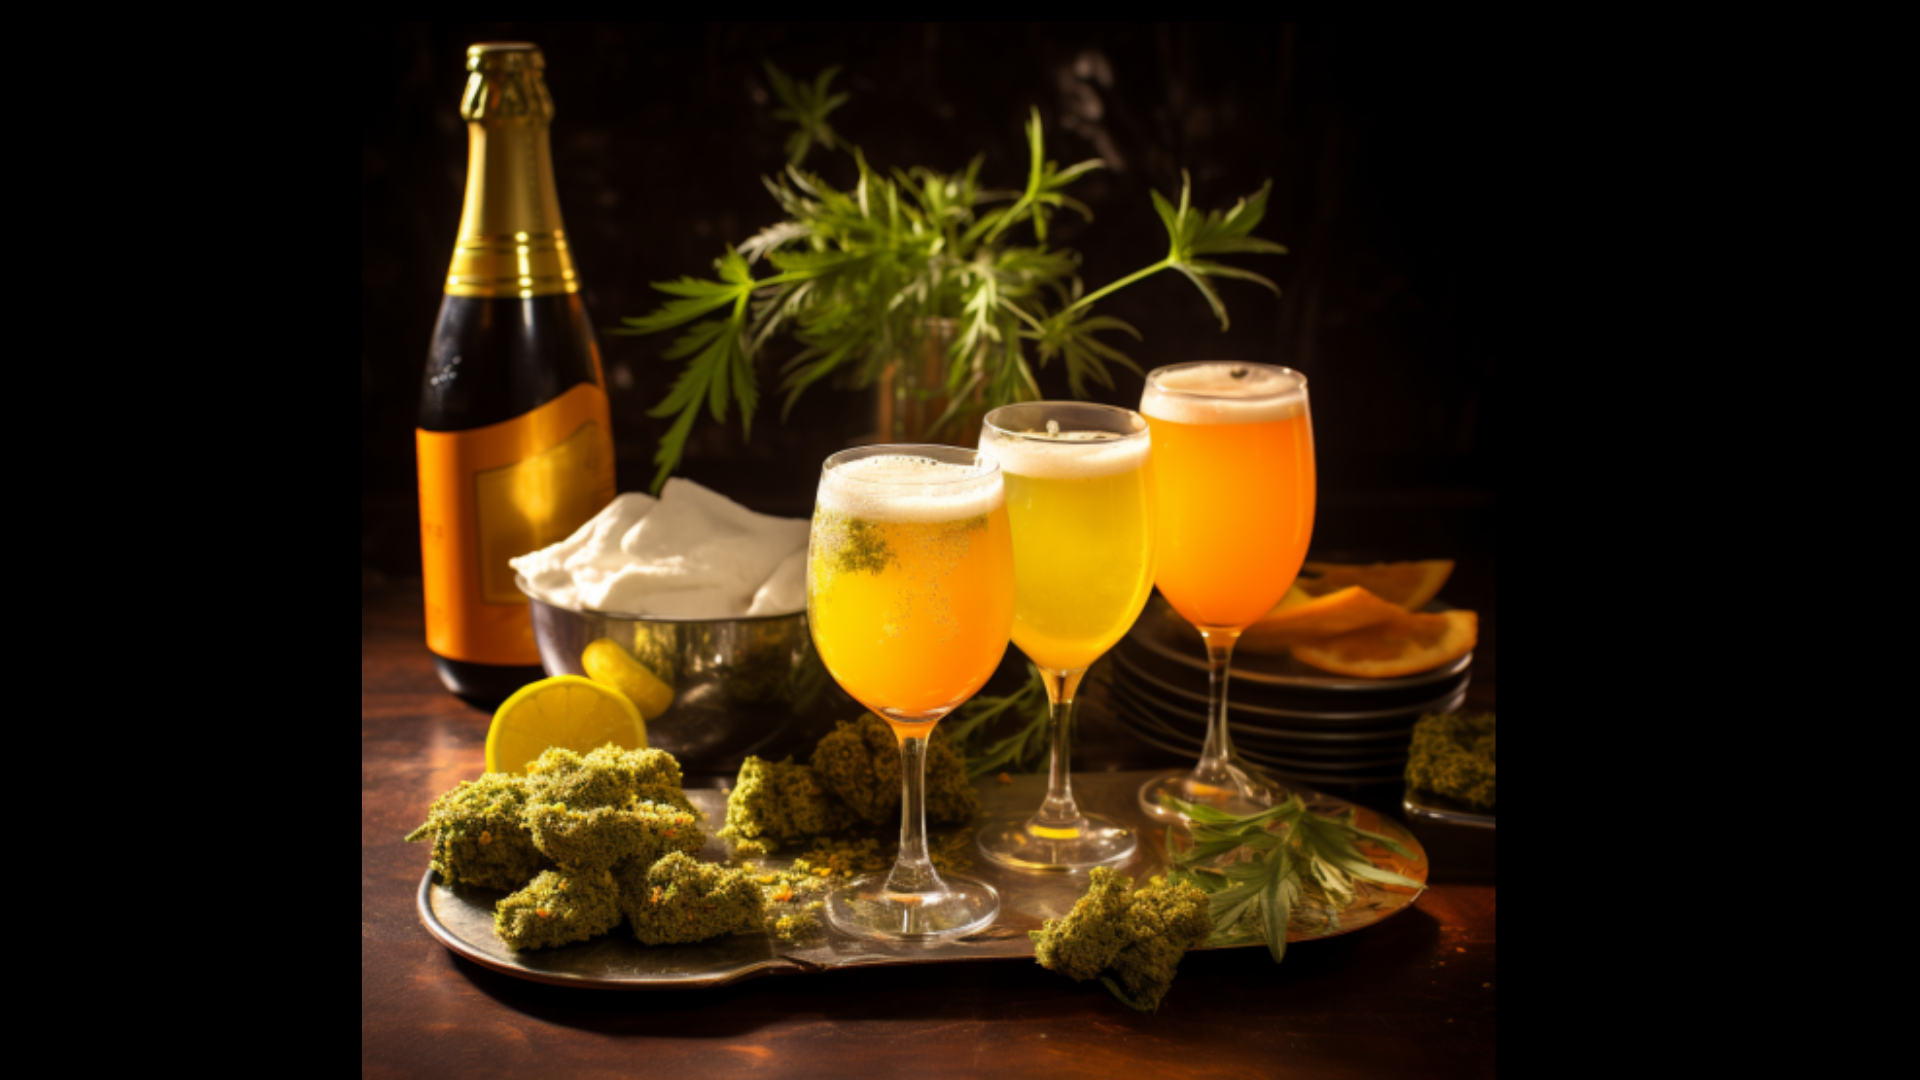 mimosa strain. table of mimosas, champagne, cannabis plant and nugs